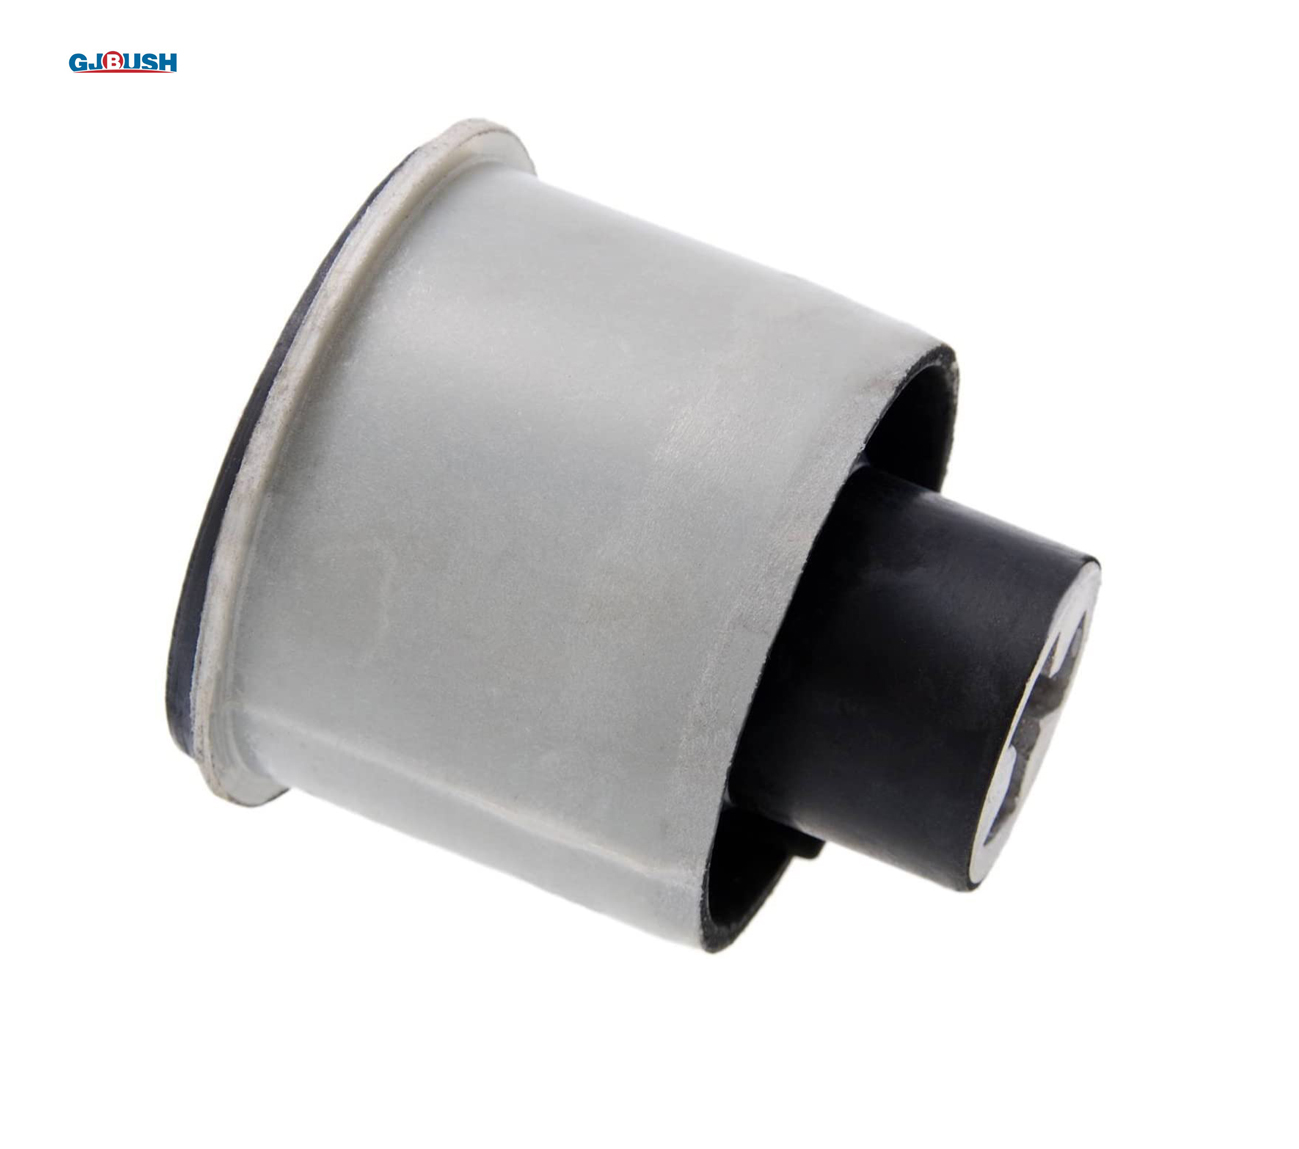 New axle bushing factory price for car industry-2